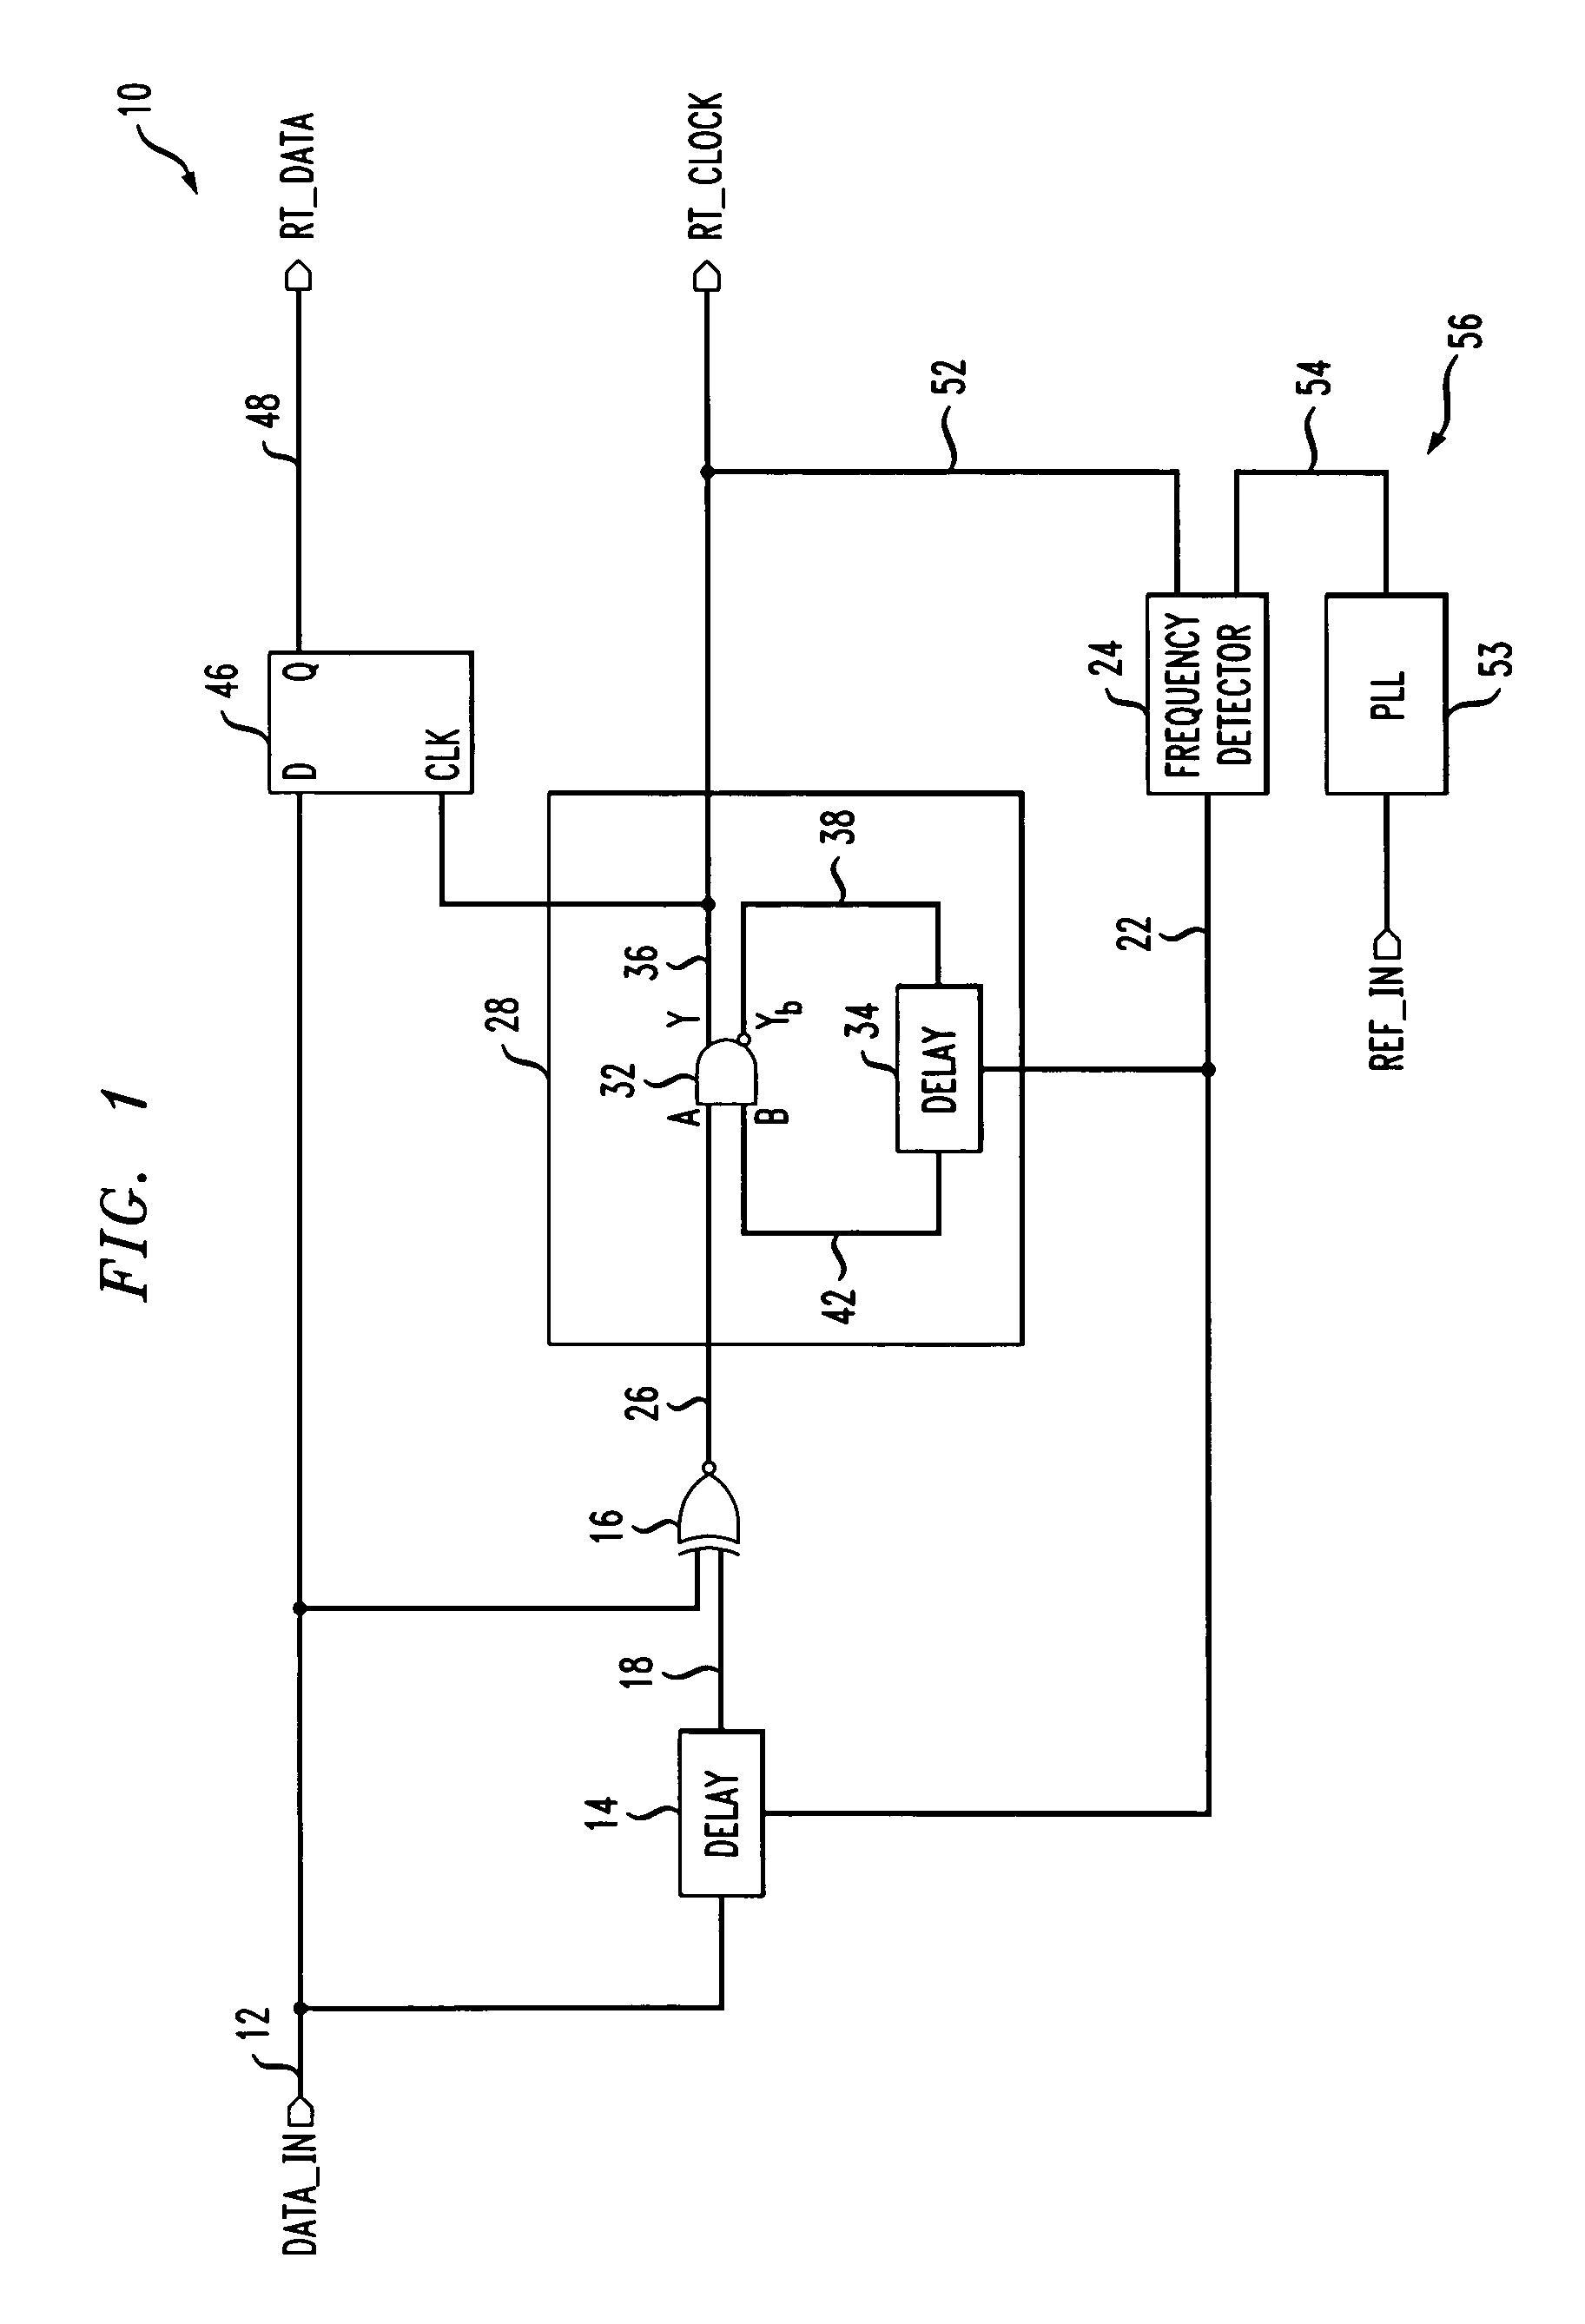 Apparatus and method for calibrating the frequency of a clock and data recovery circuit